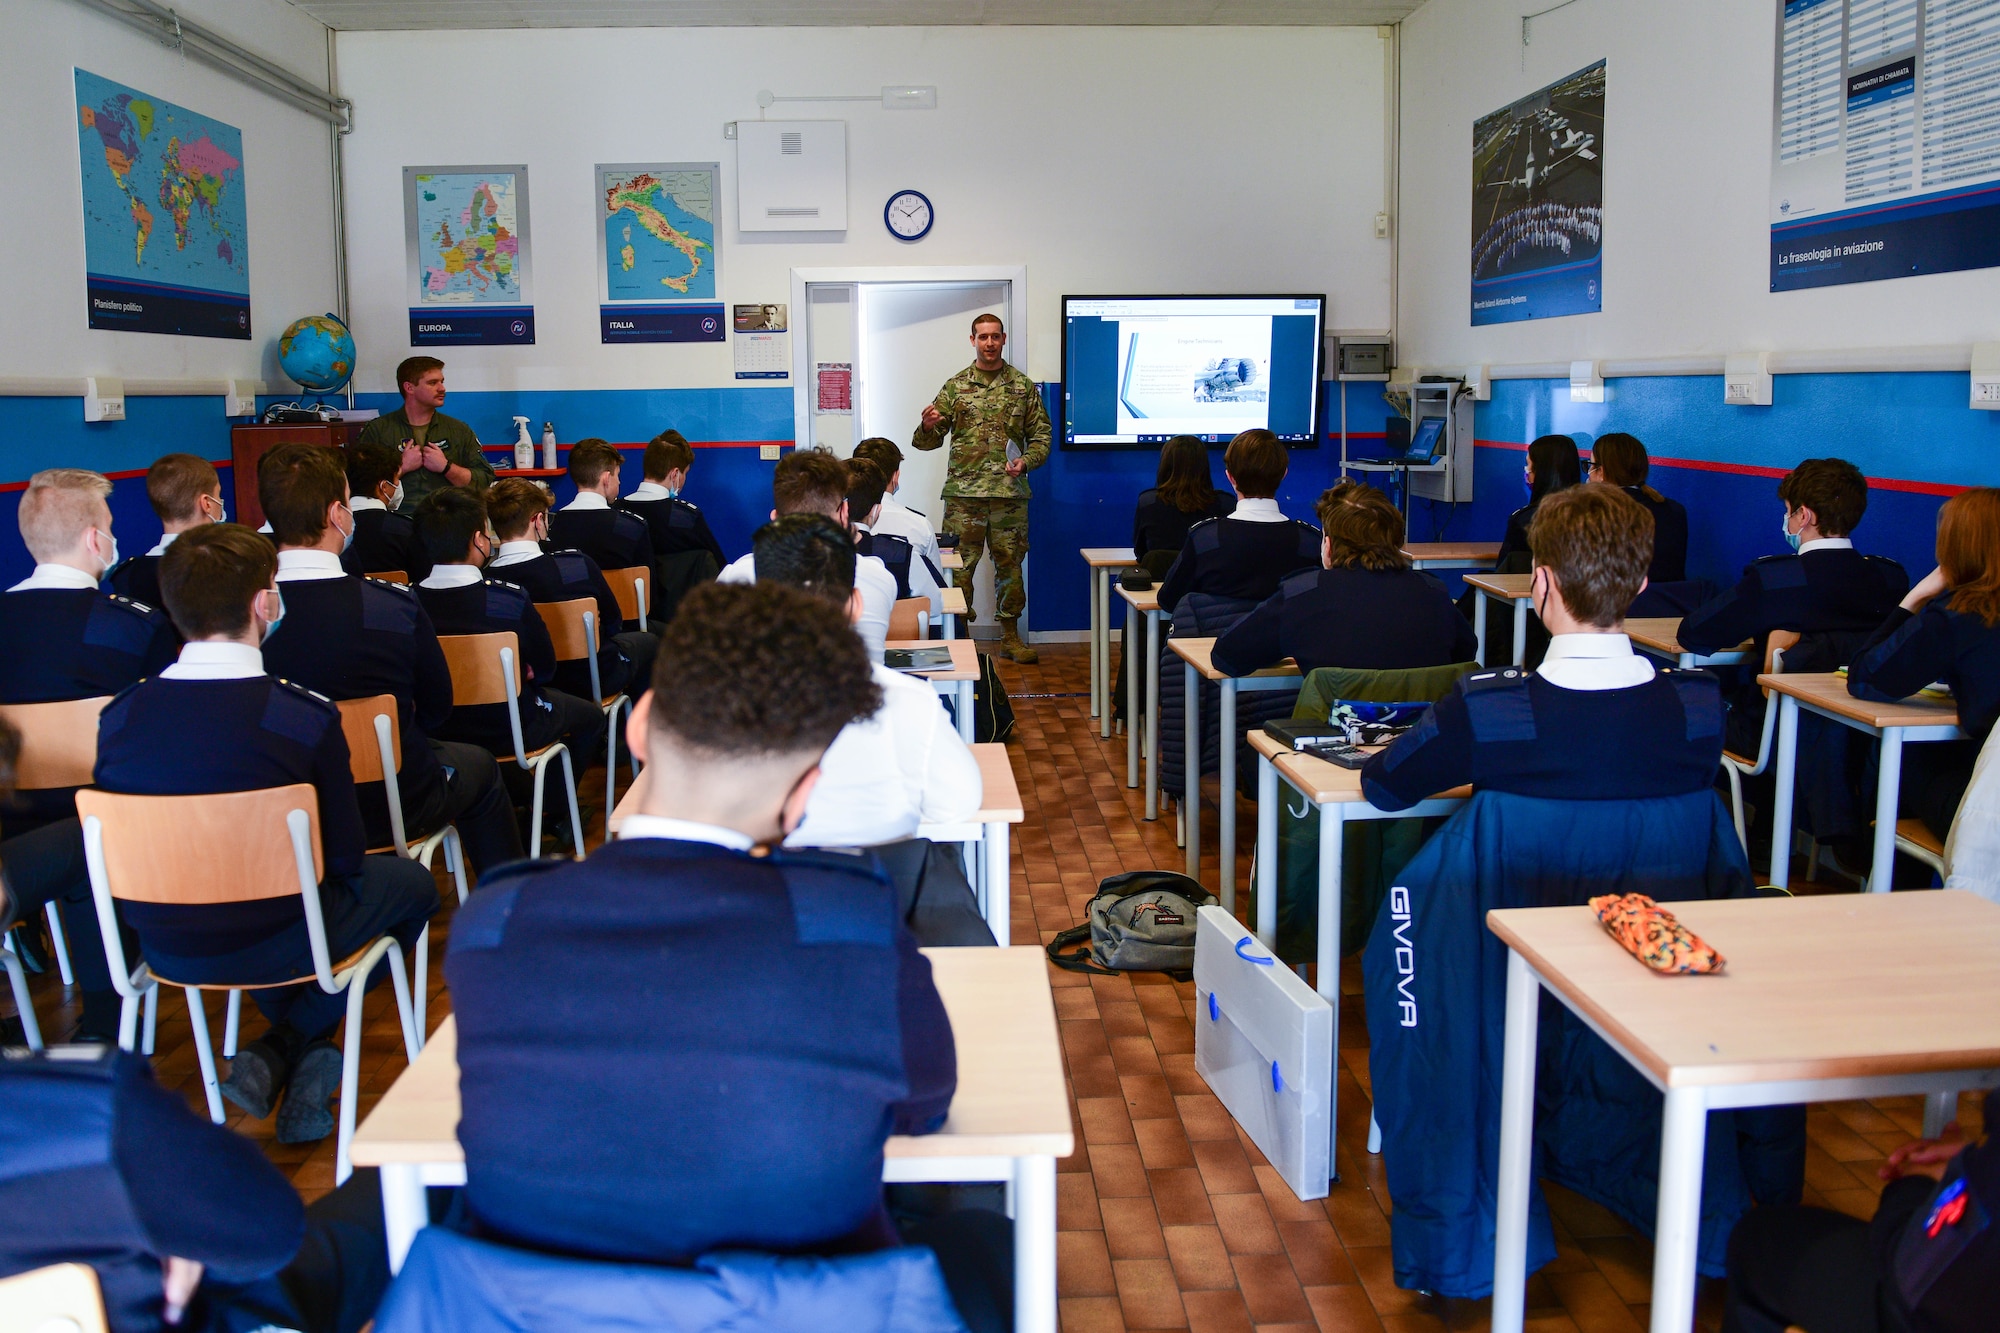 Tech. Sgt. Jacob Thompson, 31st Maintenance Group Quality Assurance inspector, shares his job experiences with high school aeronautical students at the Nobile Aviation college in Udine, Italy, March 8, 2022. There are approximately 90 students in the Nobile Aviation college and the pilots and maintainer spoke on their experiences in the military. (U.S. Air Force photo by Senior Airman Brooke Moeder)